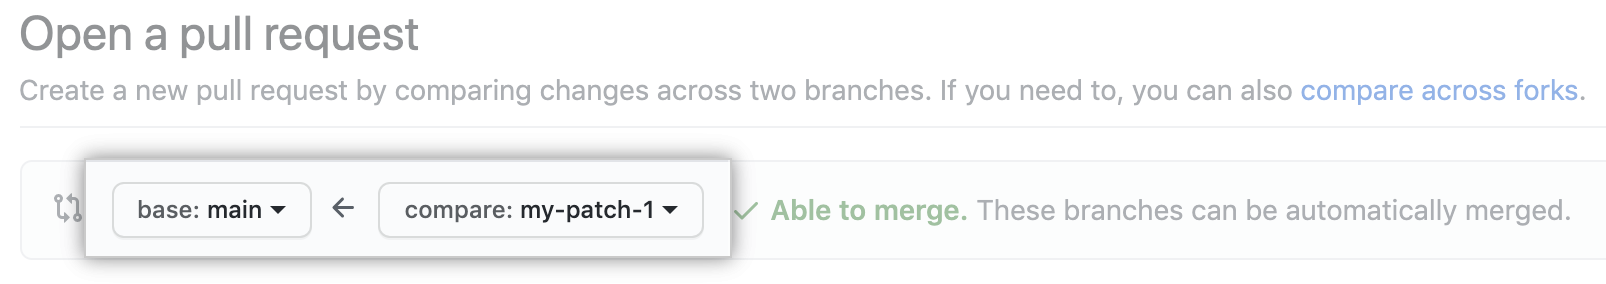 Drop-down menus for choosing the base and compare branches